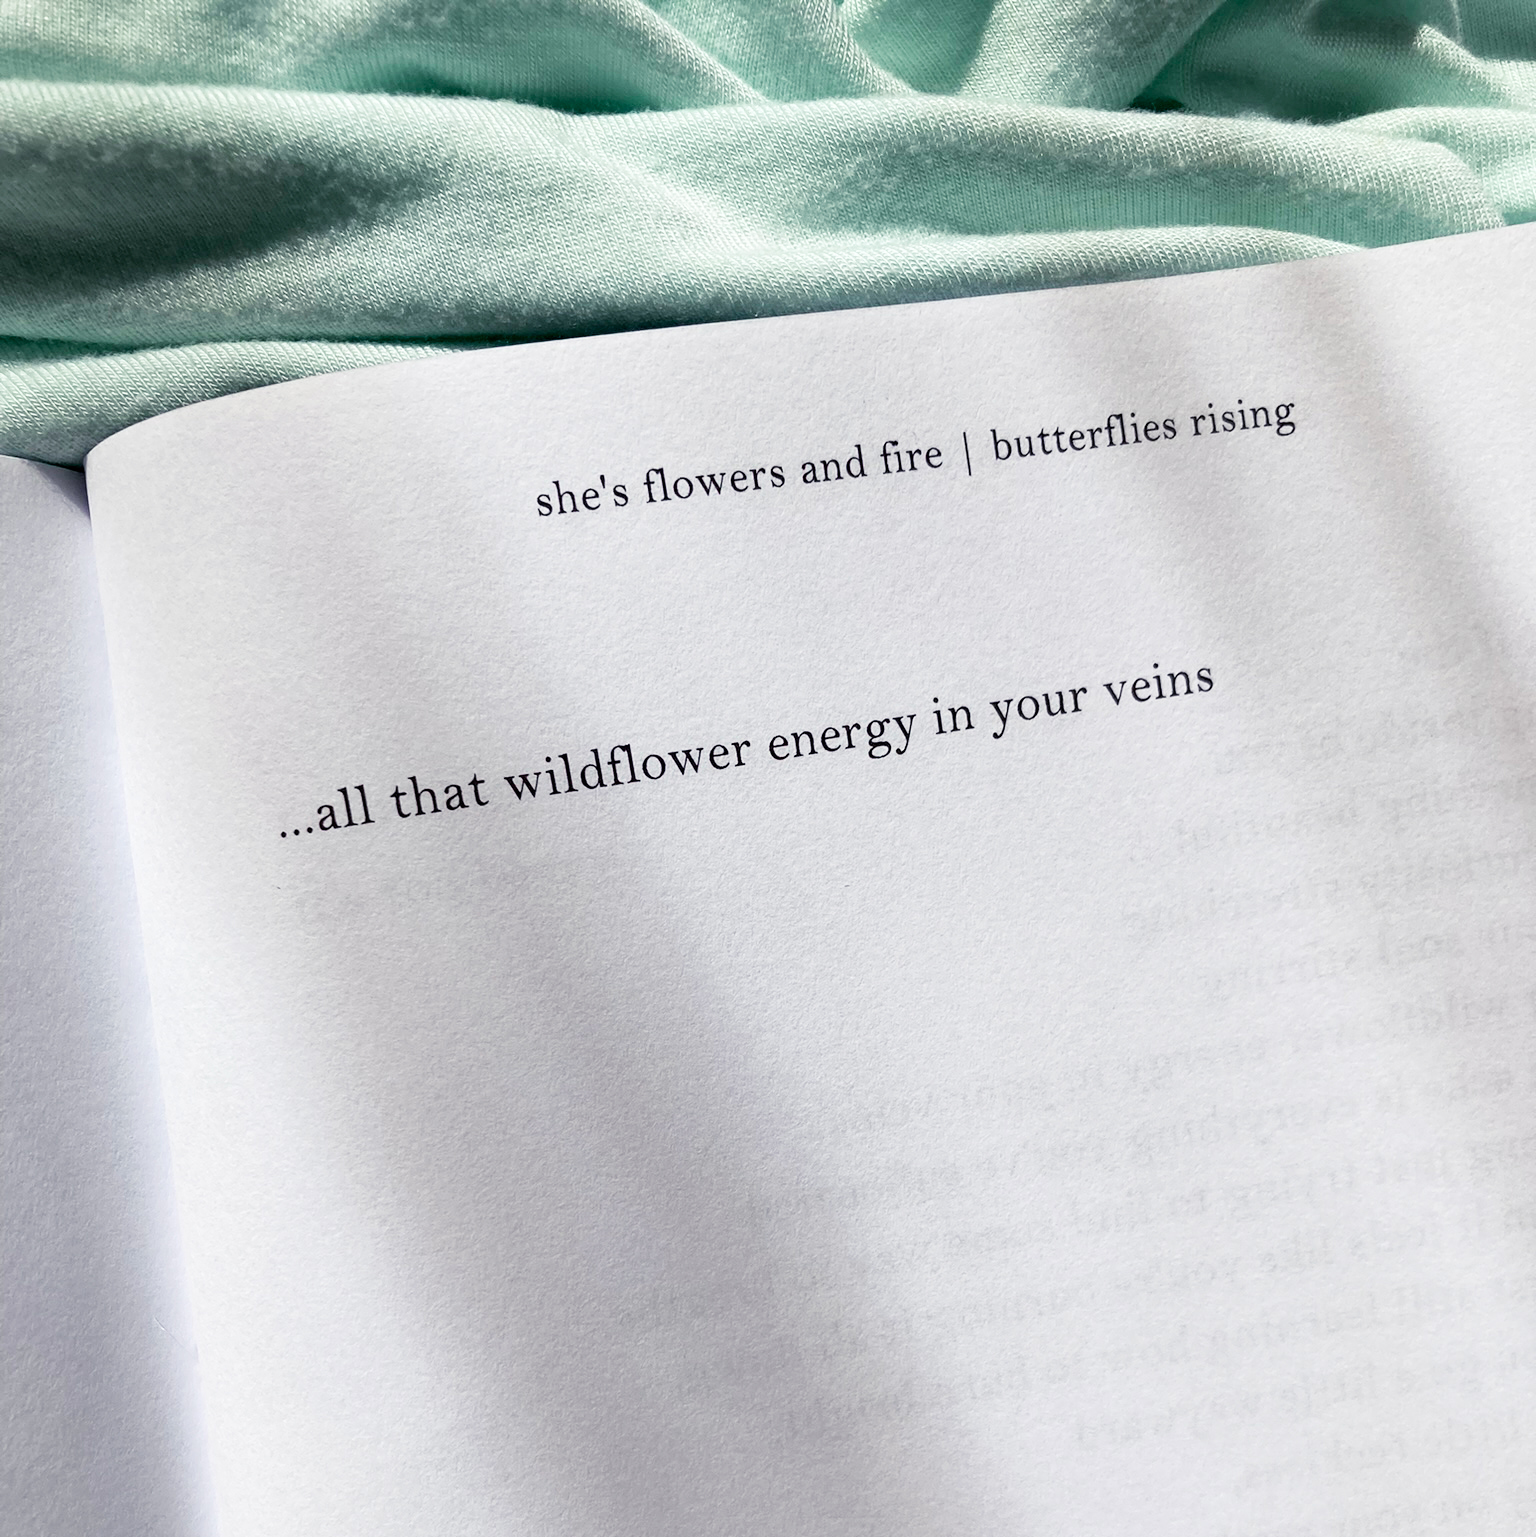 all that wildflower energy in your veins